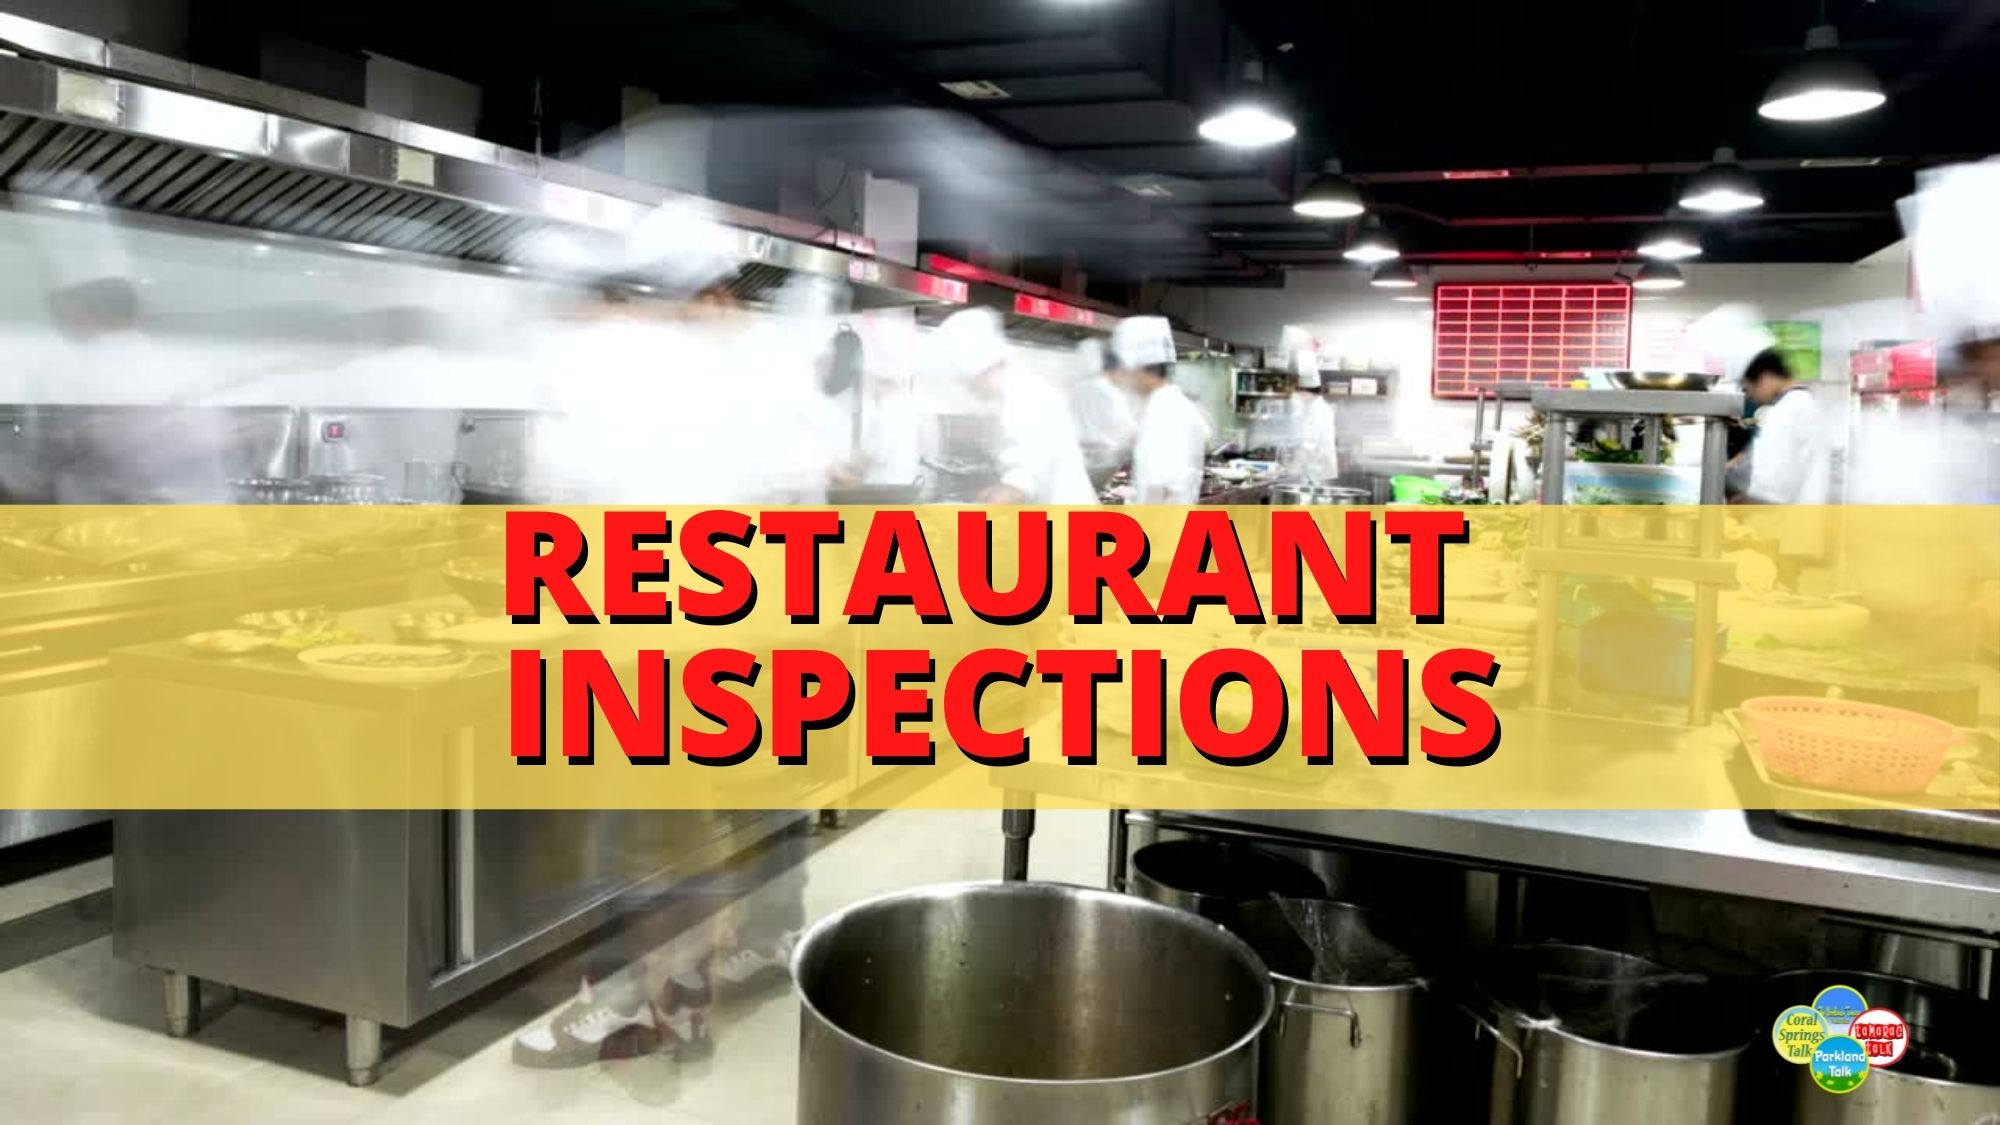 North Lauderdale Restaurant Briefly Shut Down After Inspectors Find ‘Live Roaches’